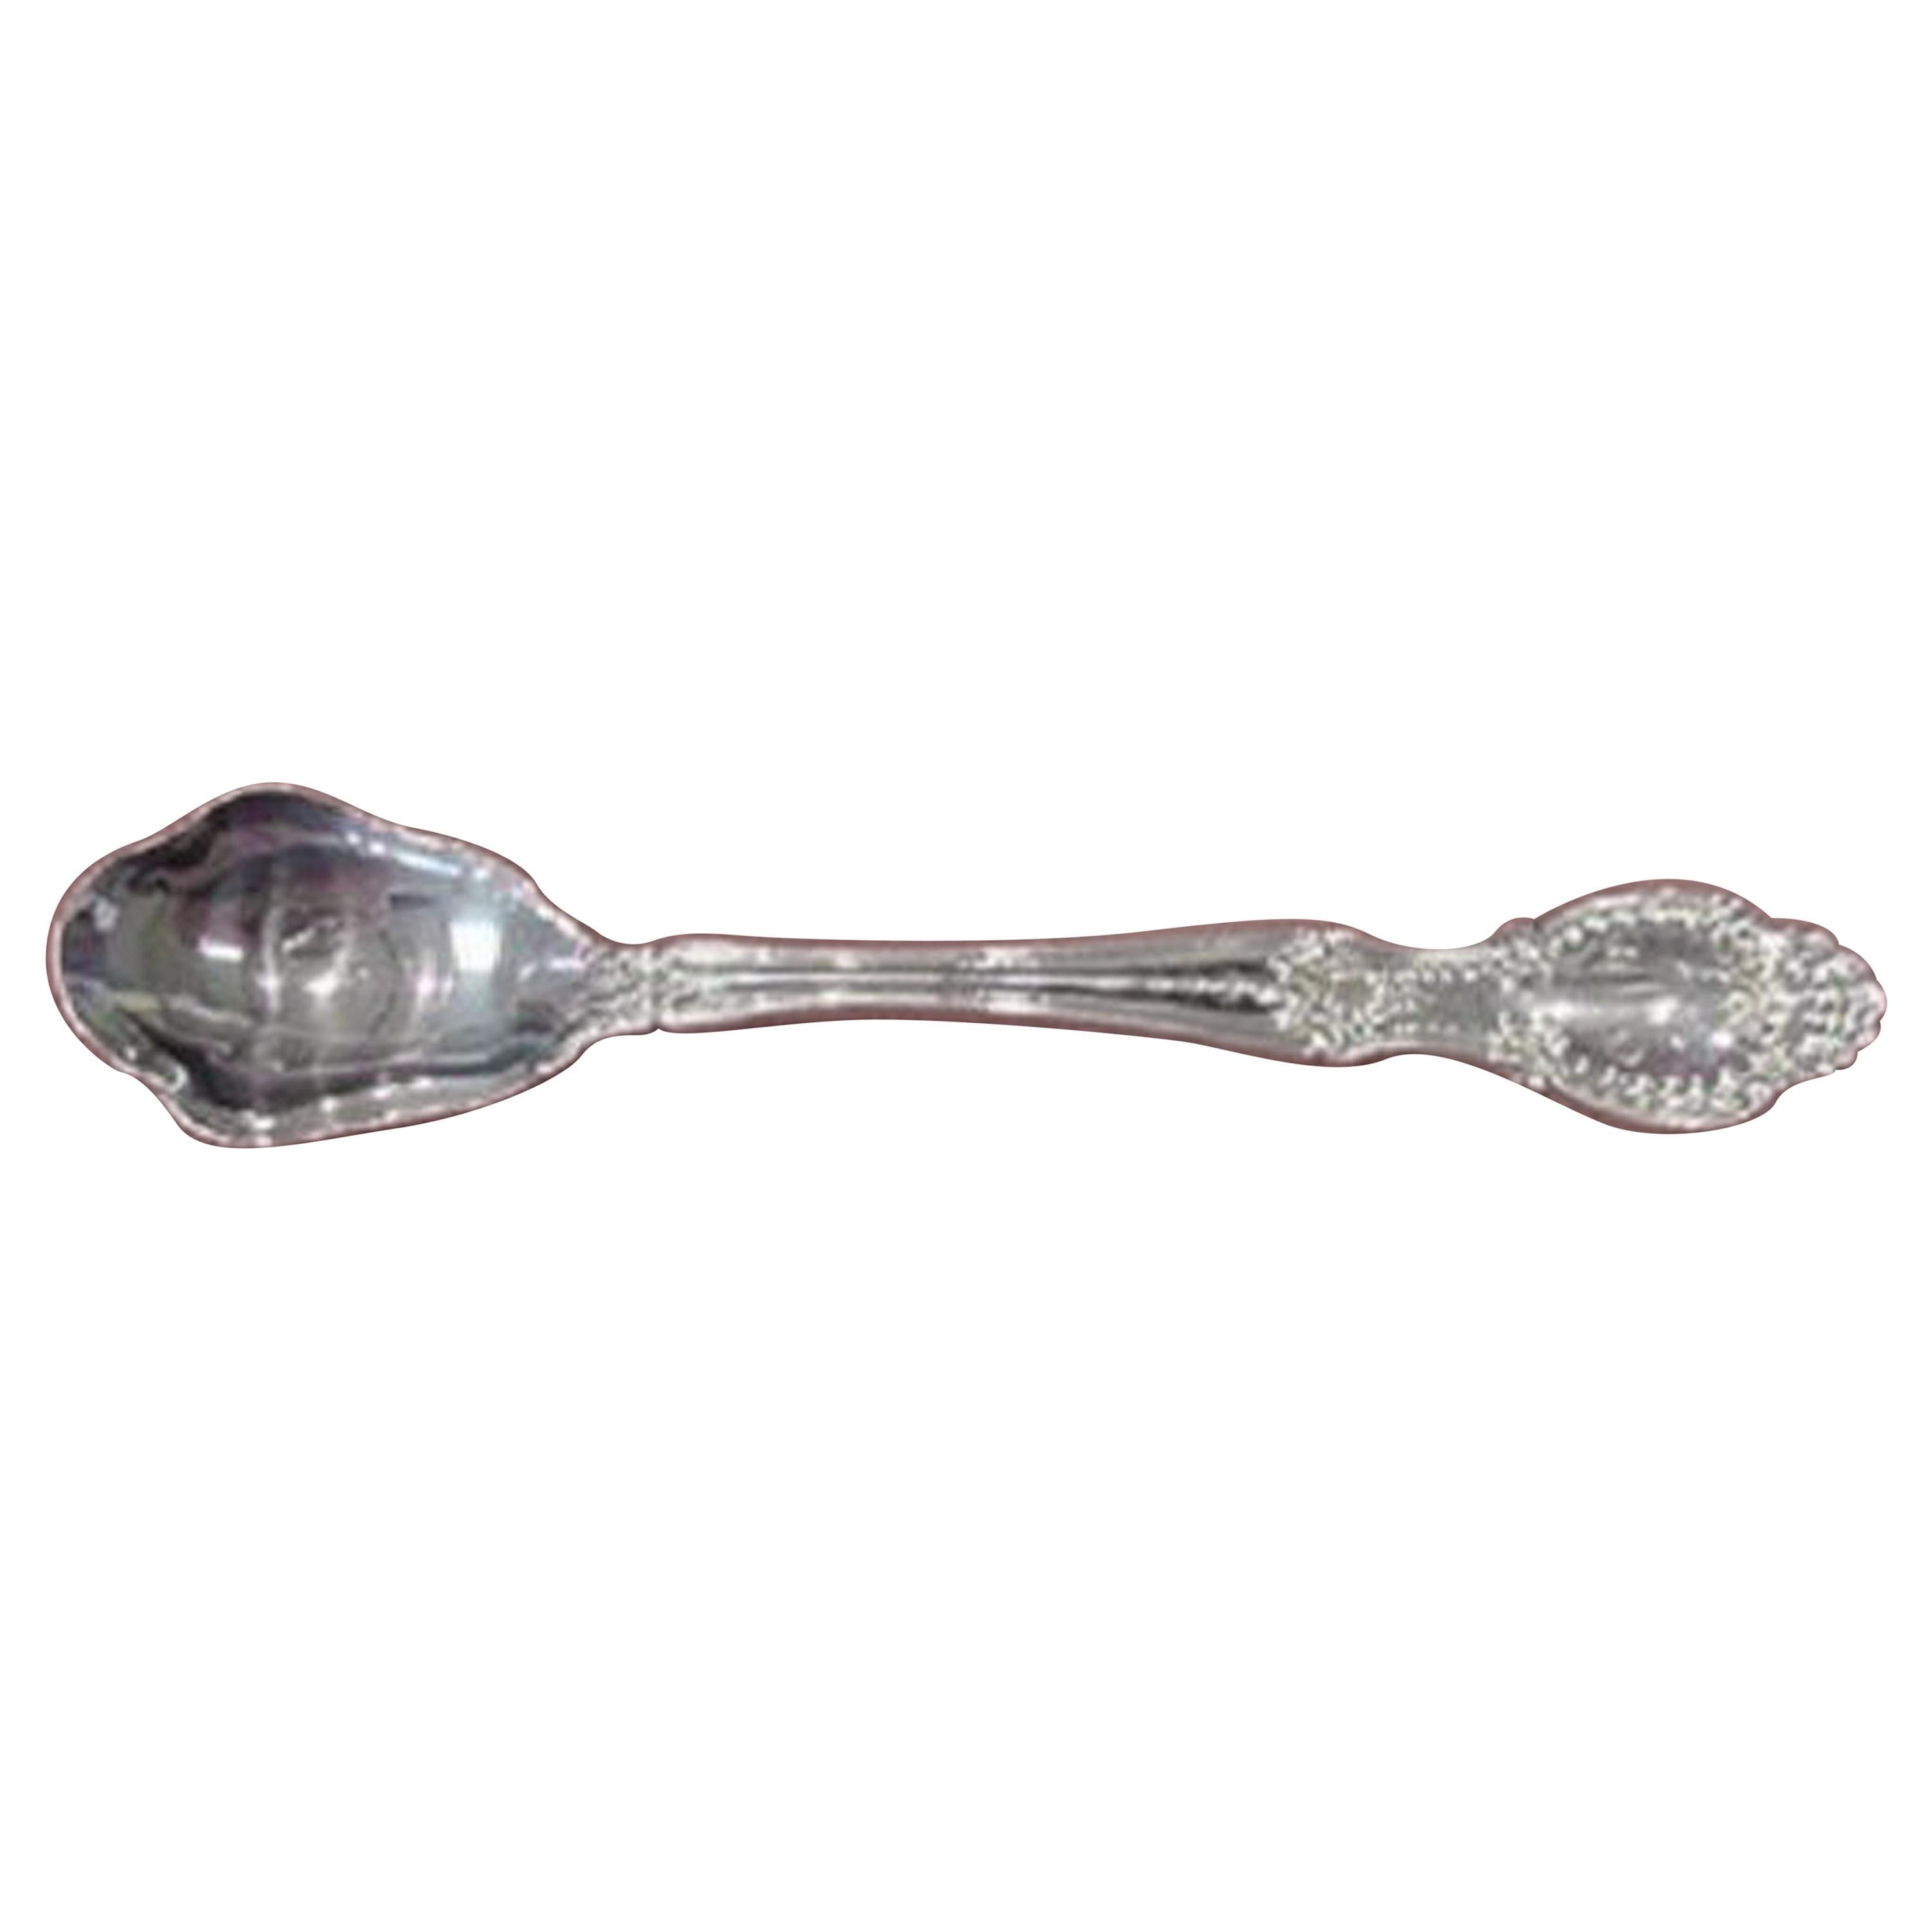 Fontainebleau by Gorham Sterling Silver Horseradish Scoop Custom Made 